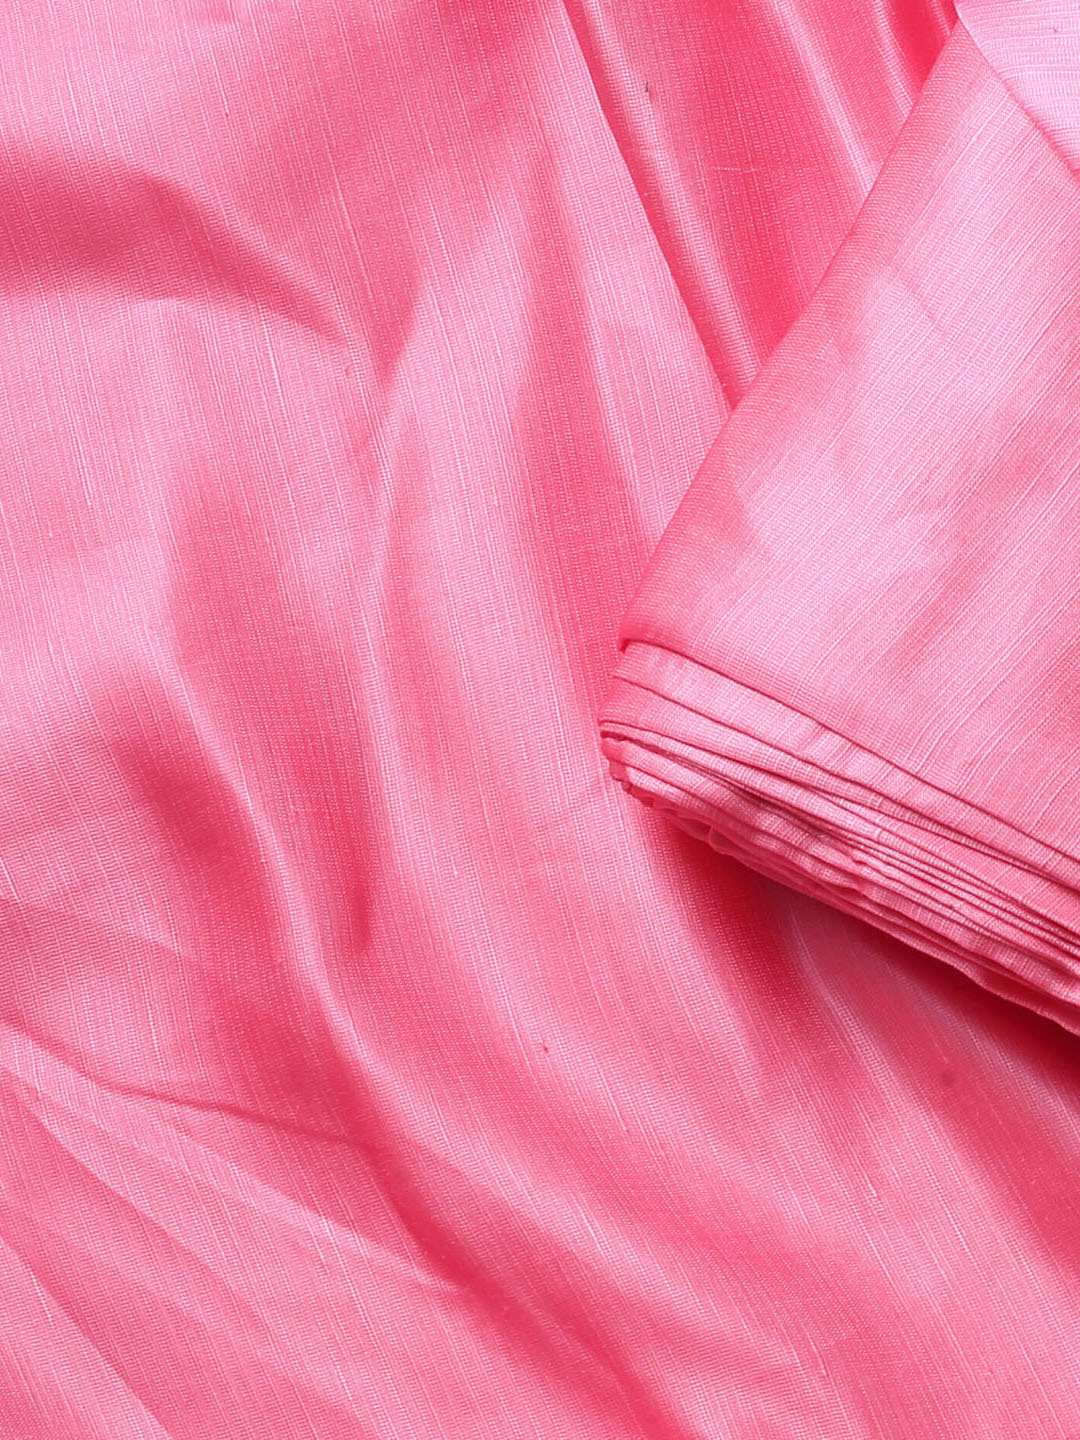 Soothing Rose Pink Satin Linen Fabric